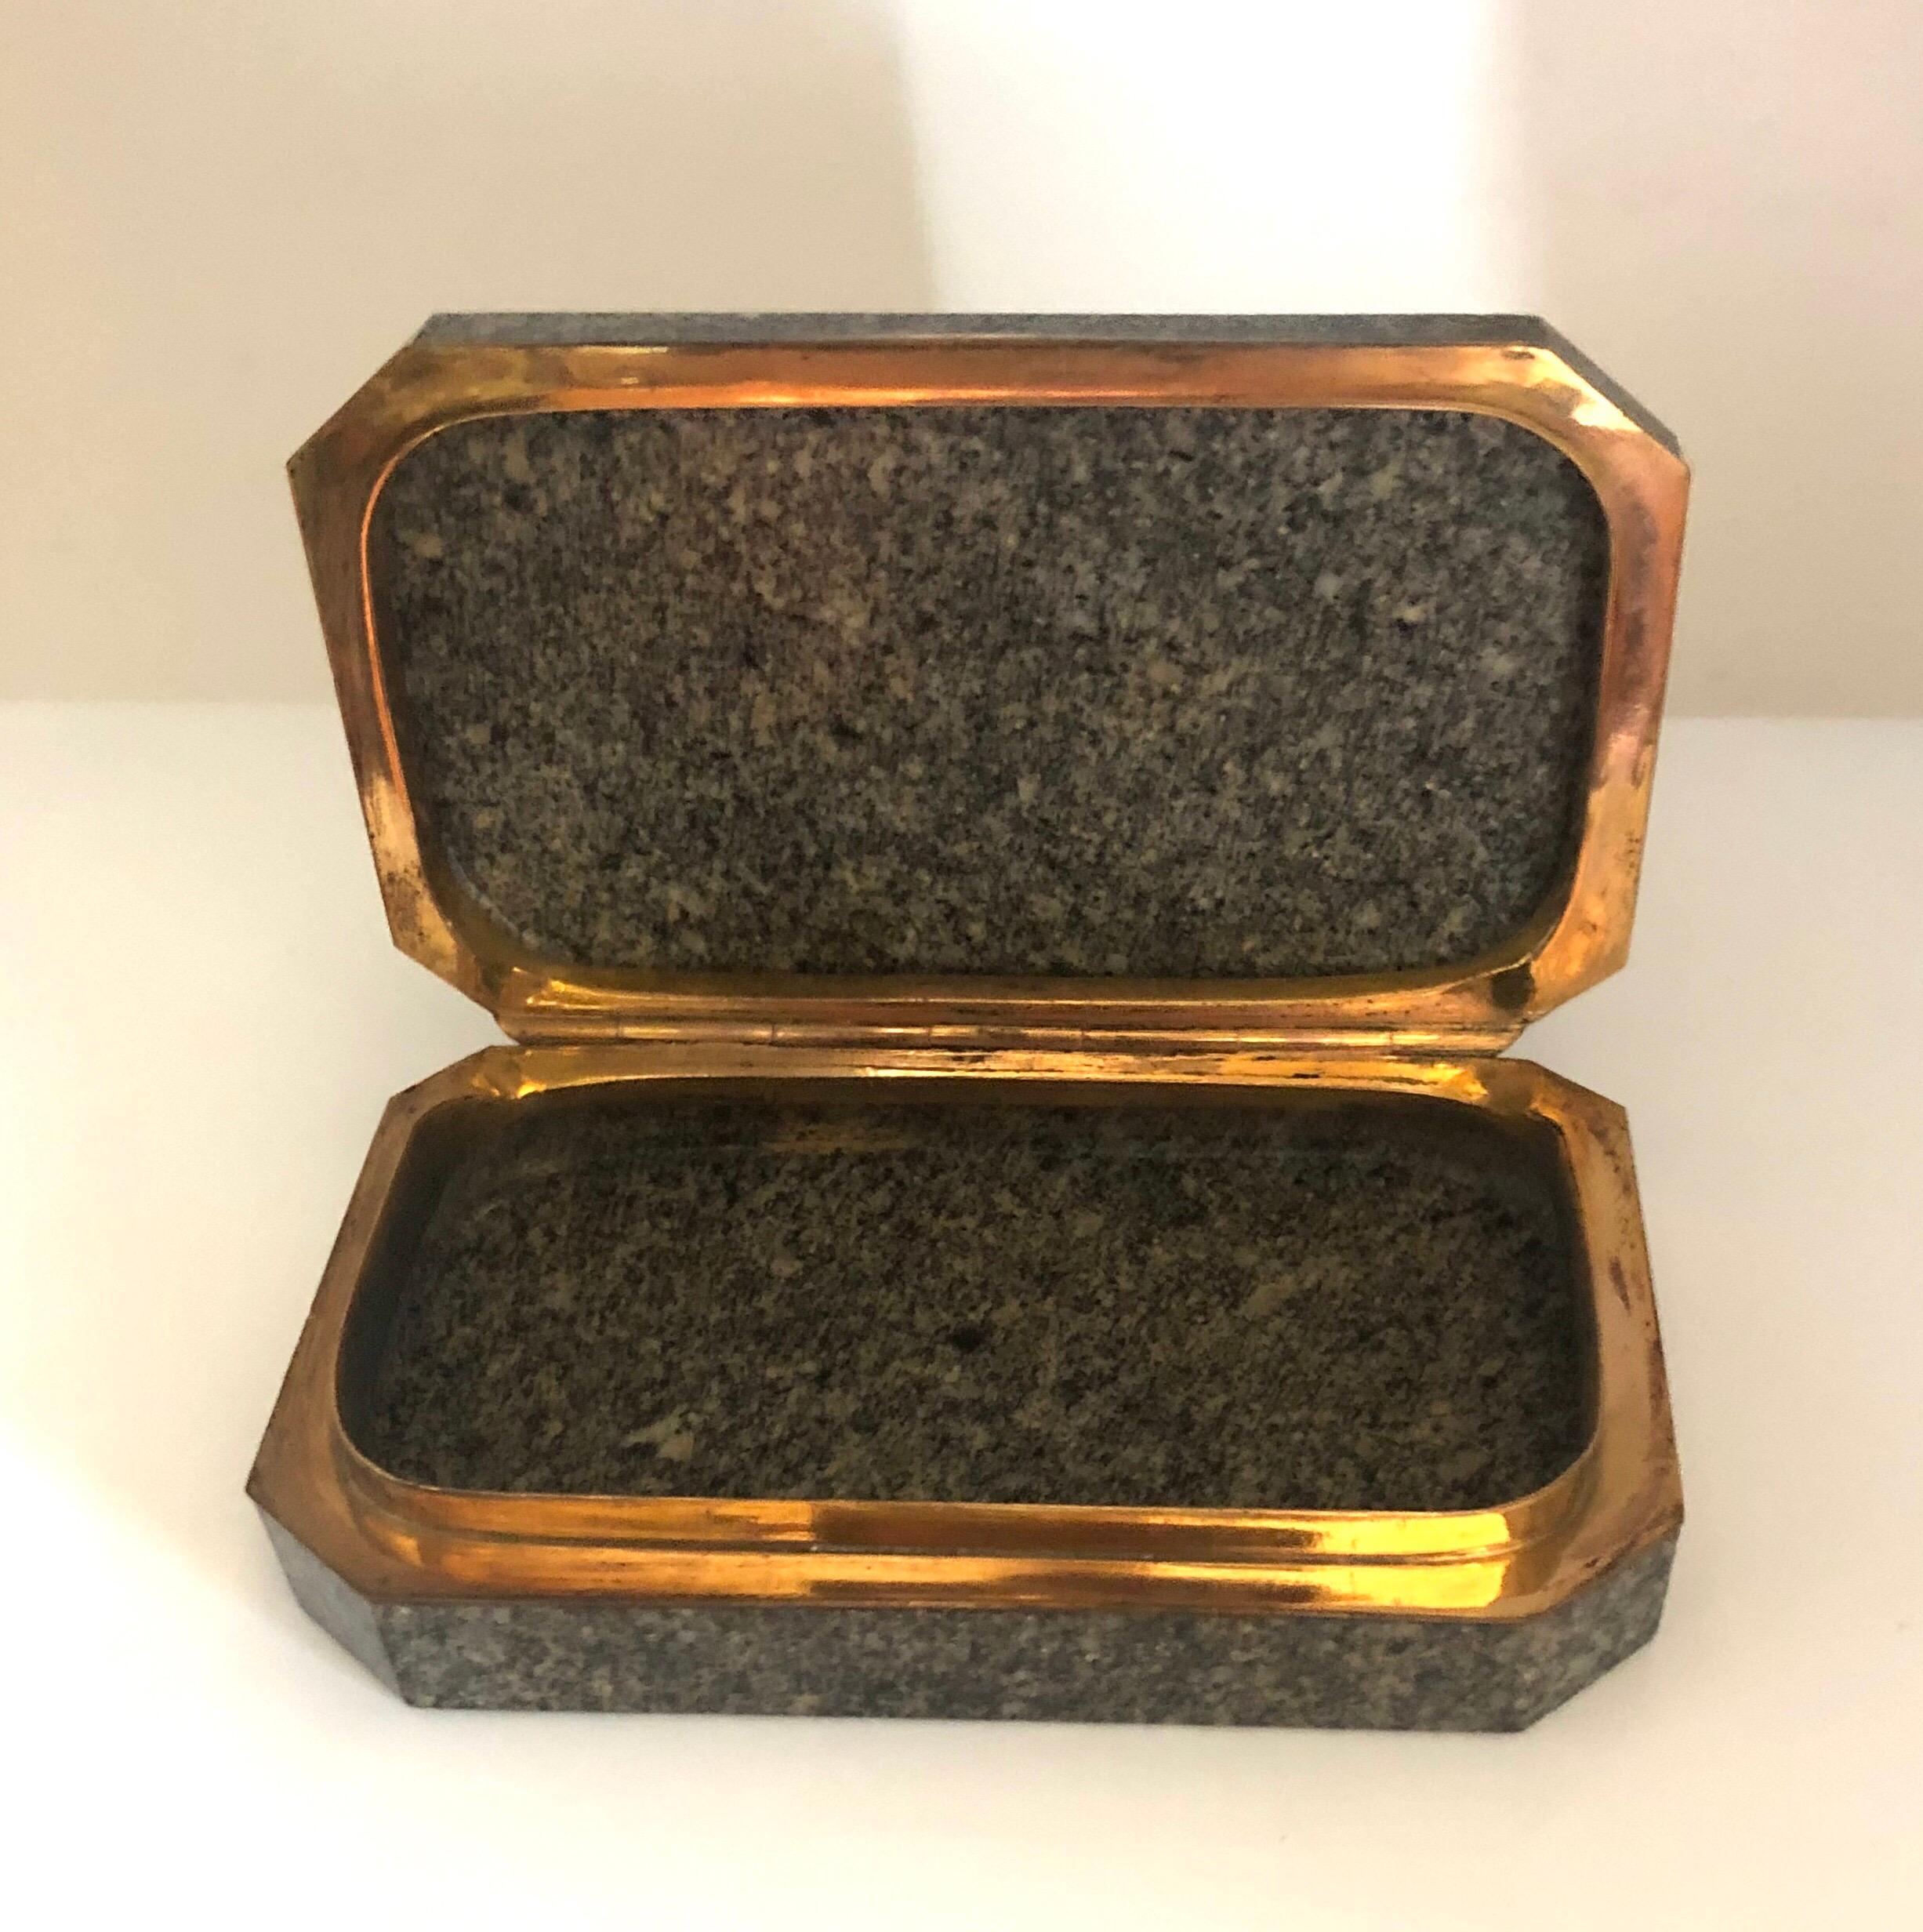 Neoclassical A Swedish Gilt-Bronze Mounted Snuff Box, Early 19th Century